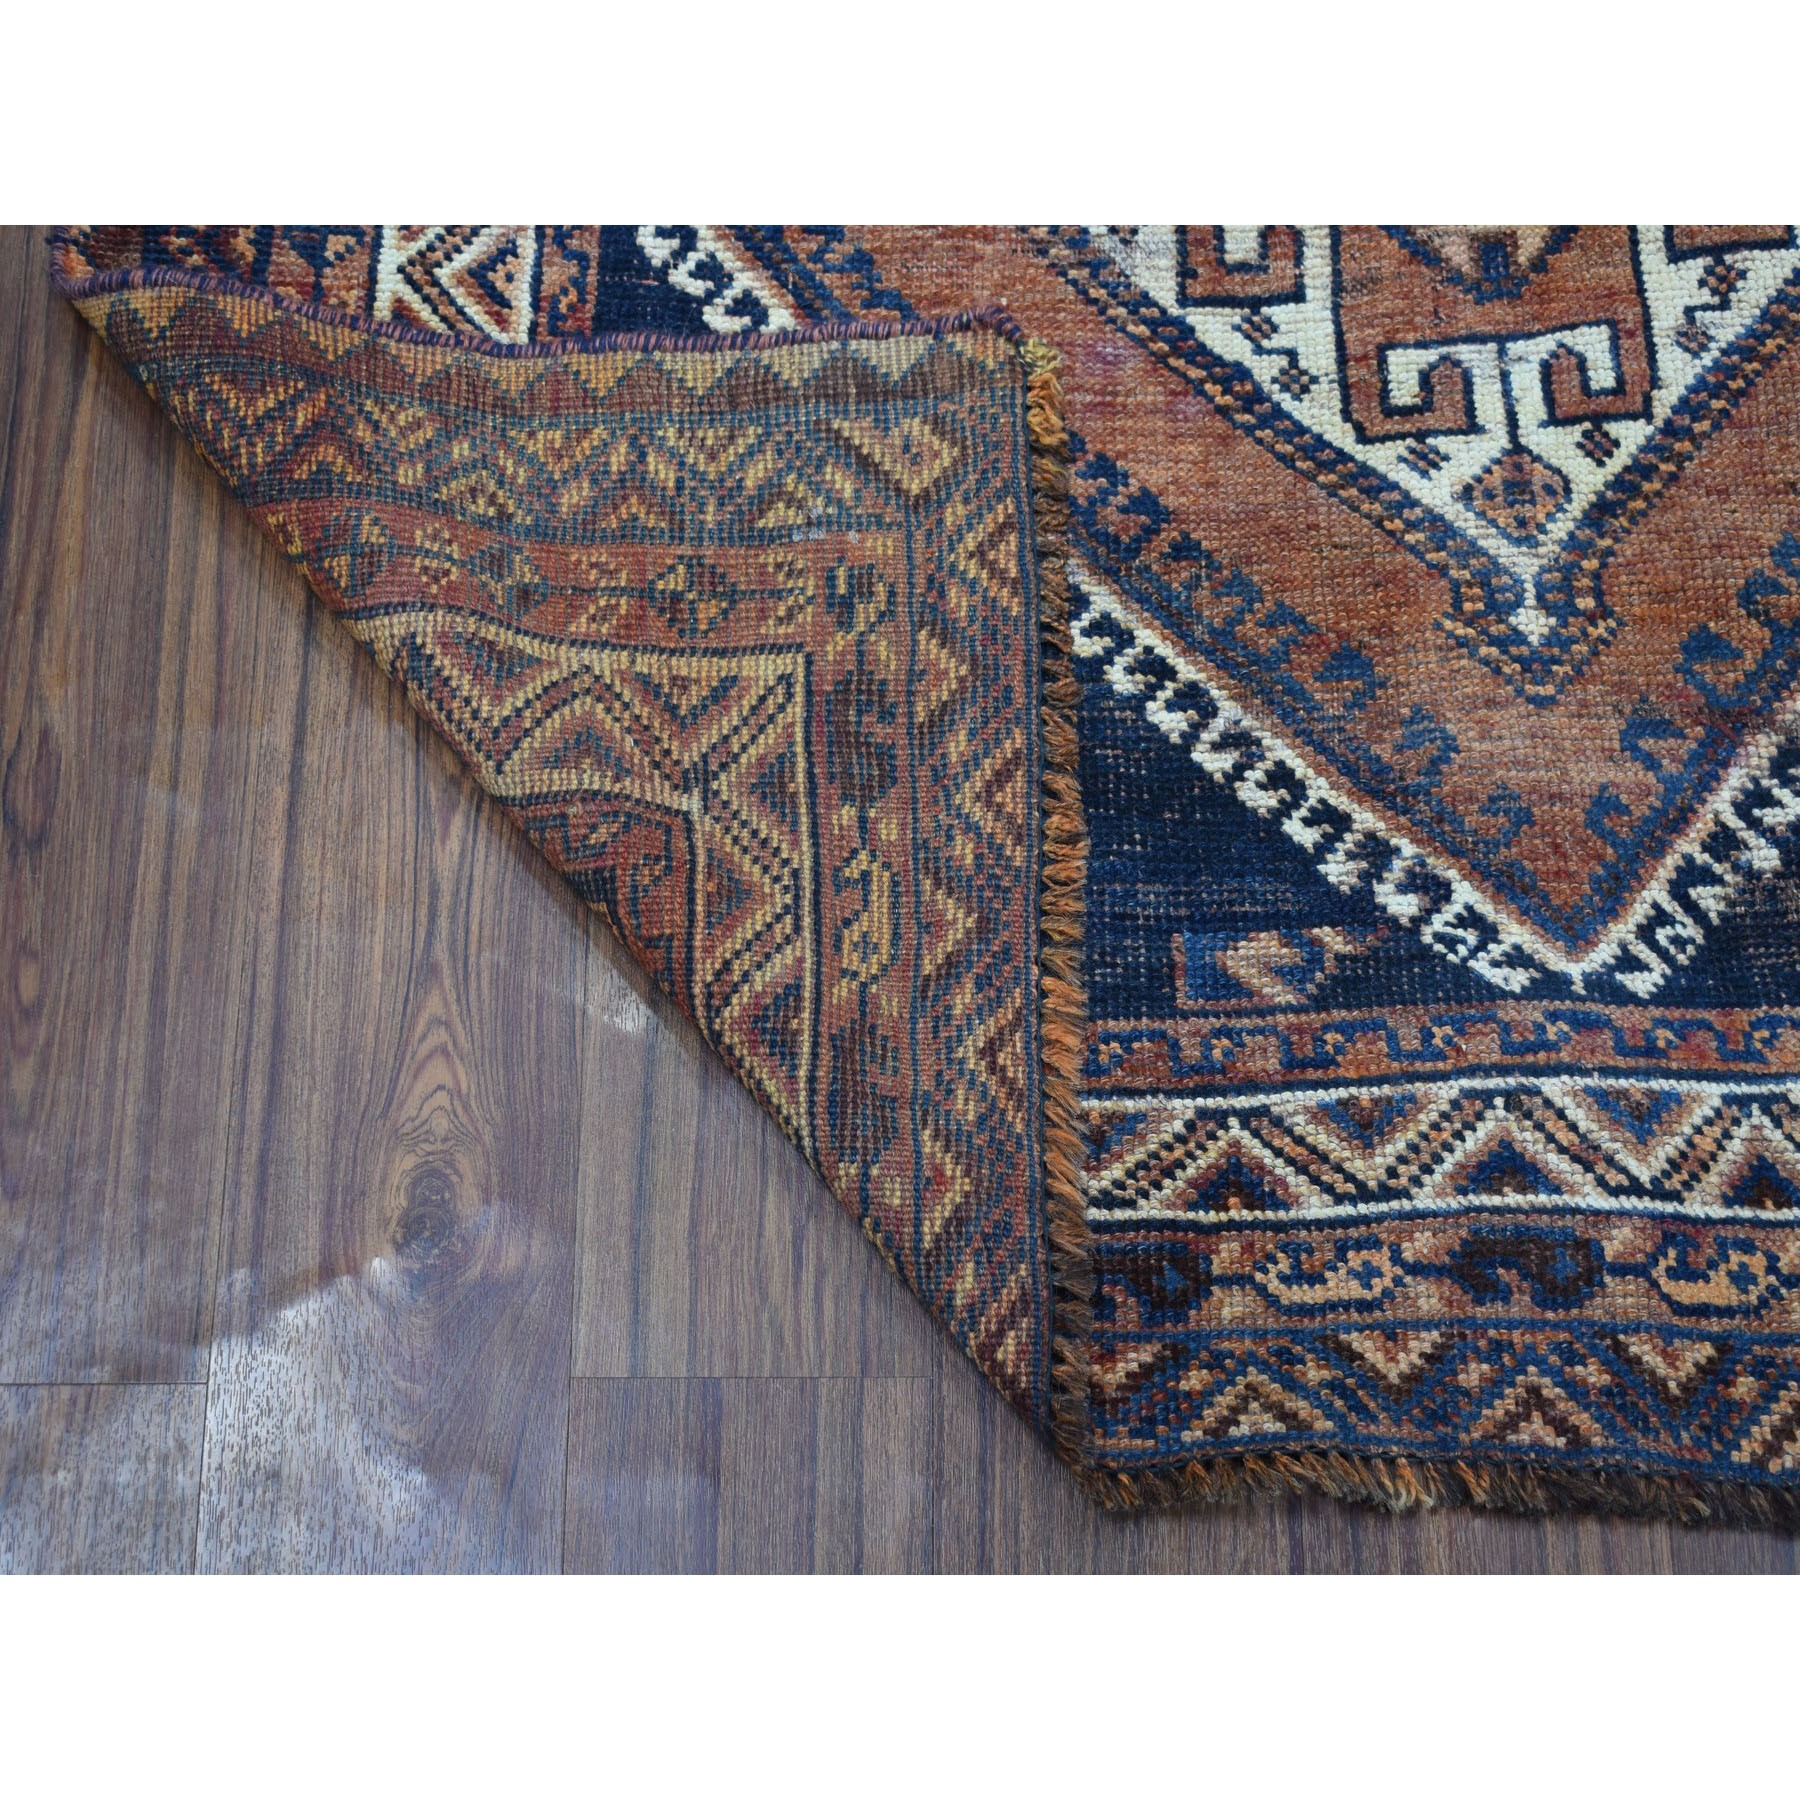 4-7 x8-5  Vintage And Worn Down Persian Qashqai Hand Knotted Bohemian Rug 